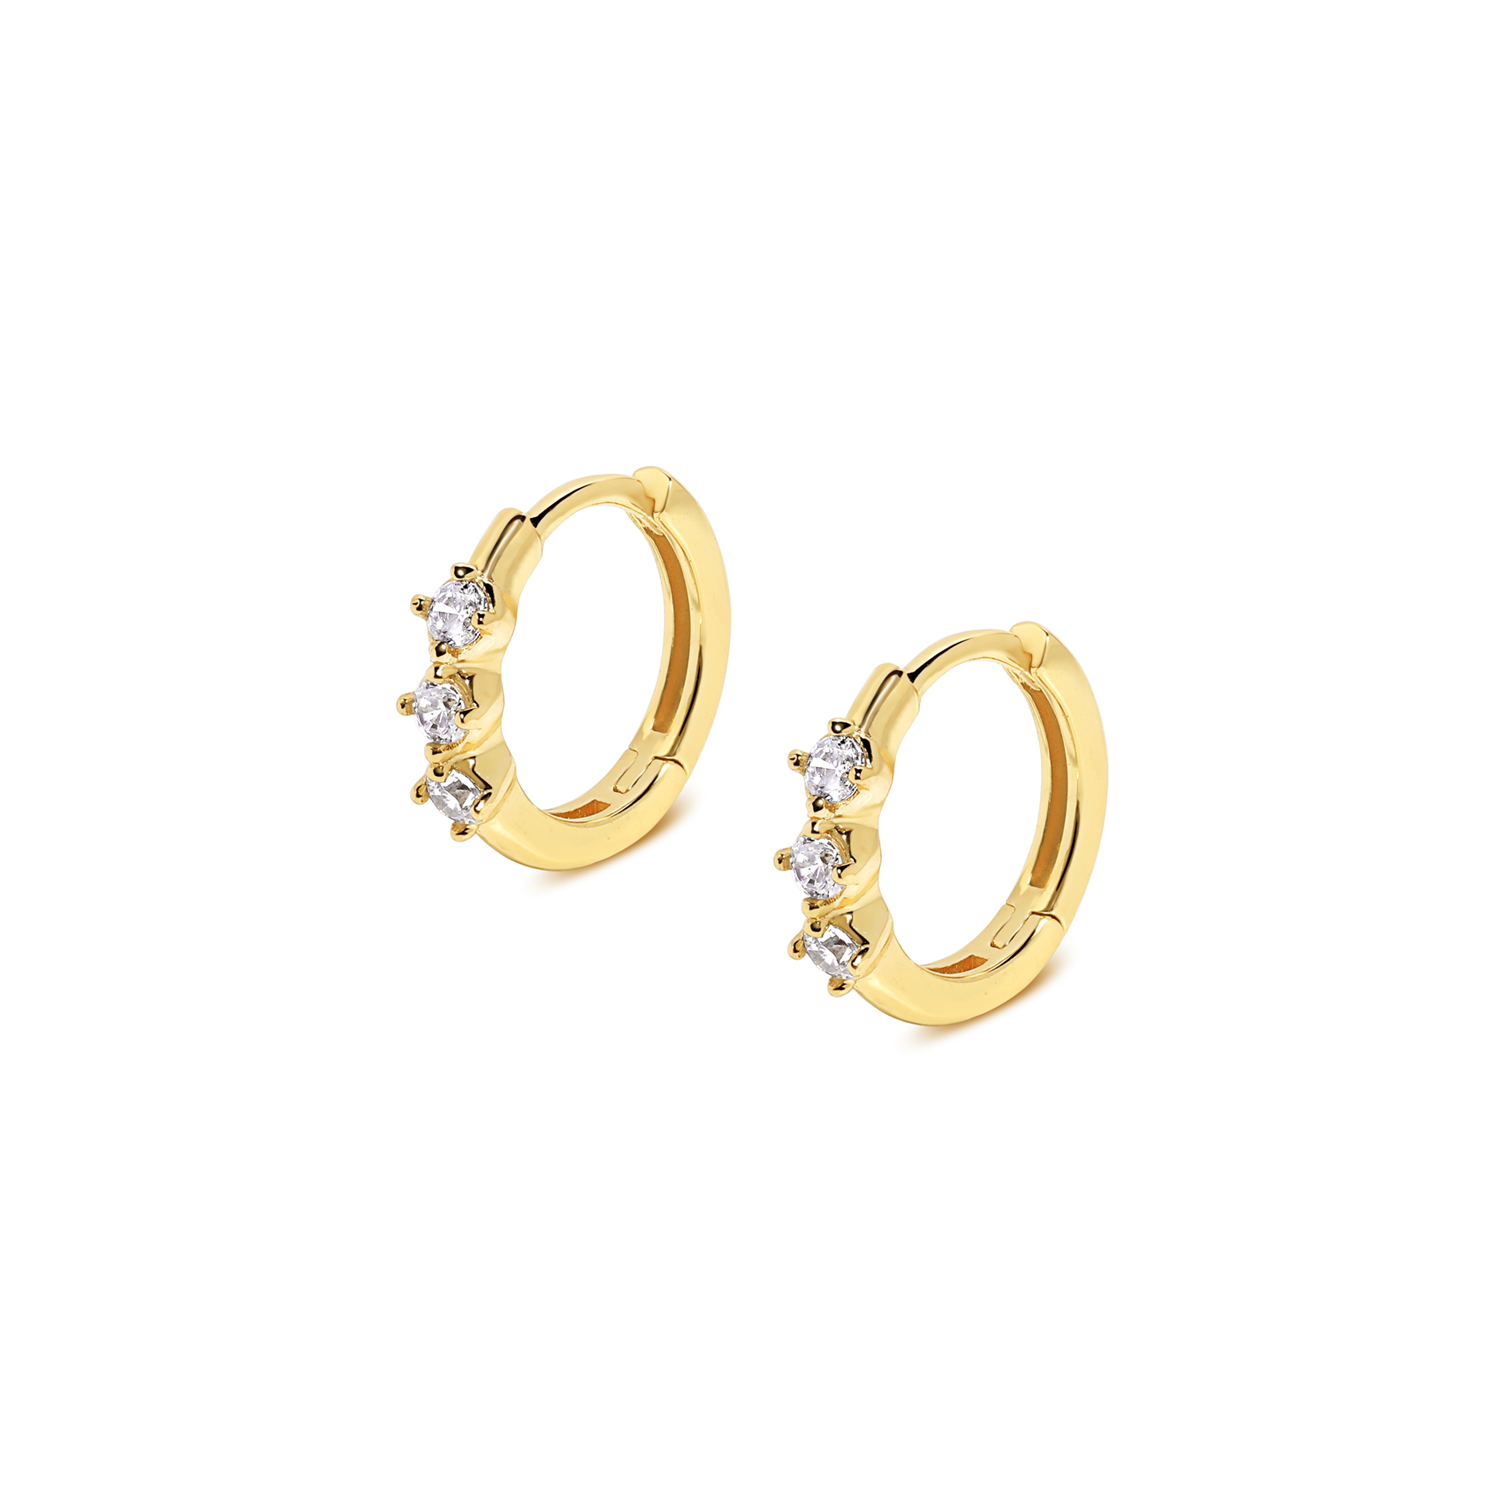 Luxurious and elegant earrings. Gold huggies with cubic zirconia